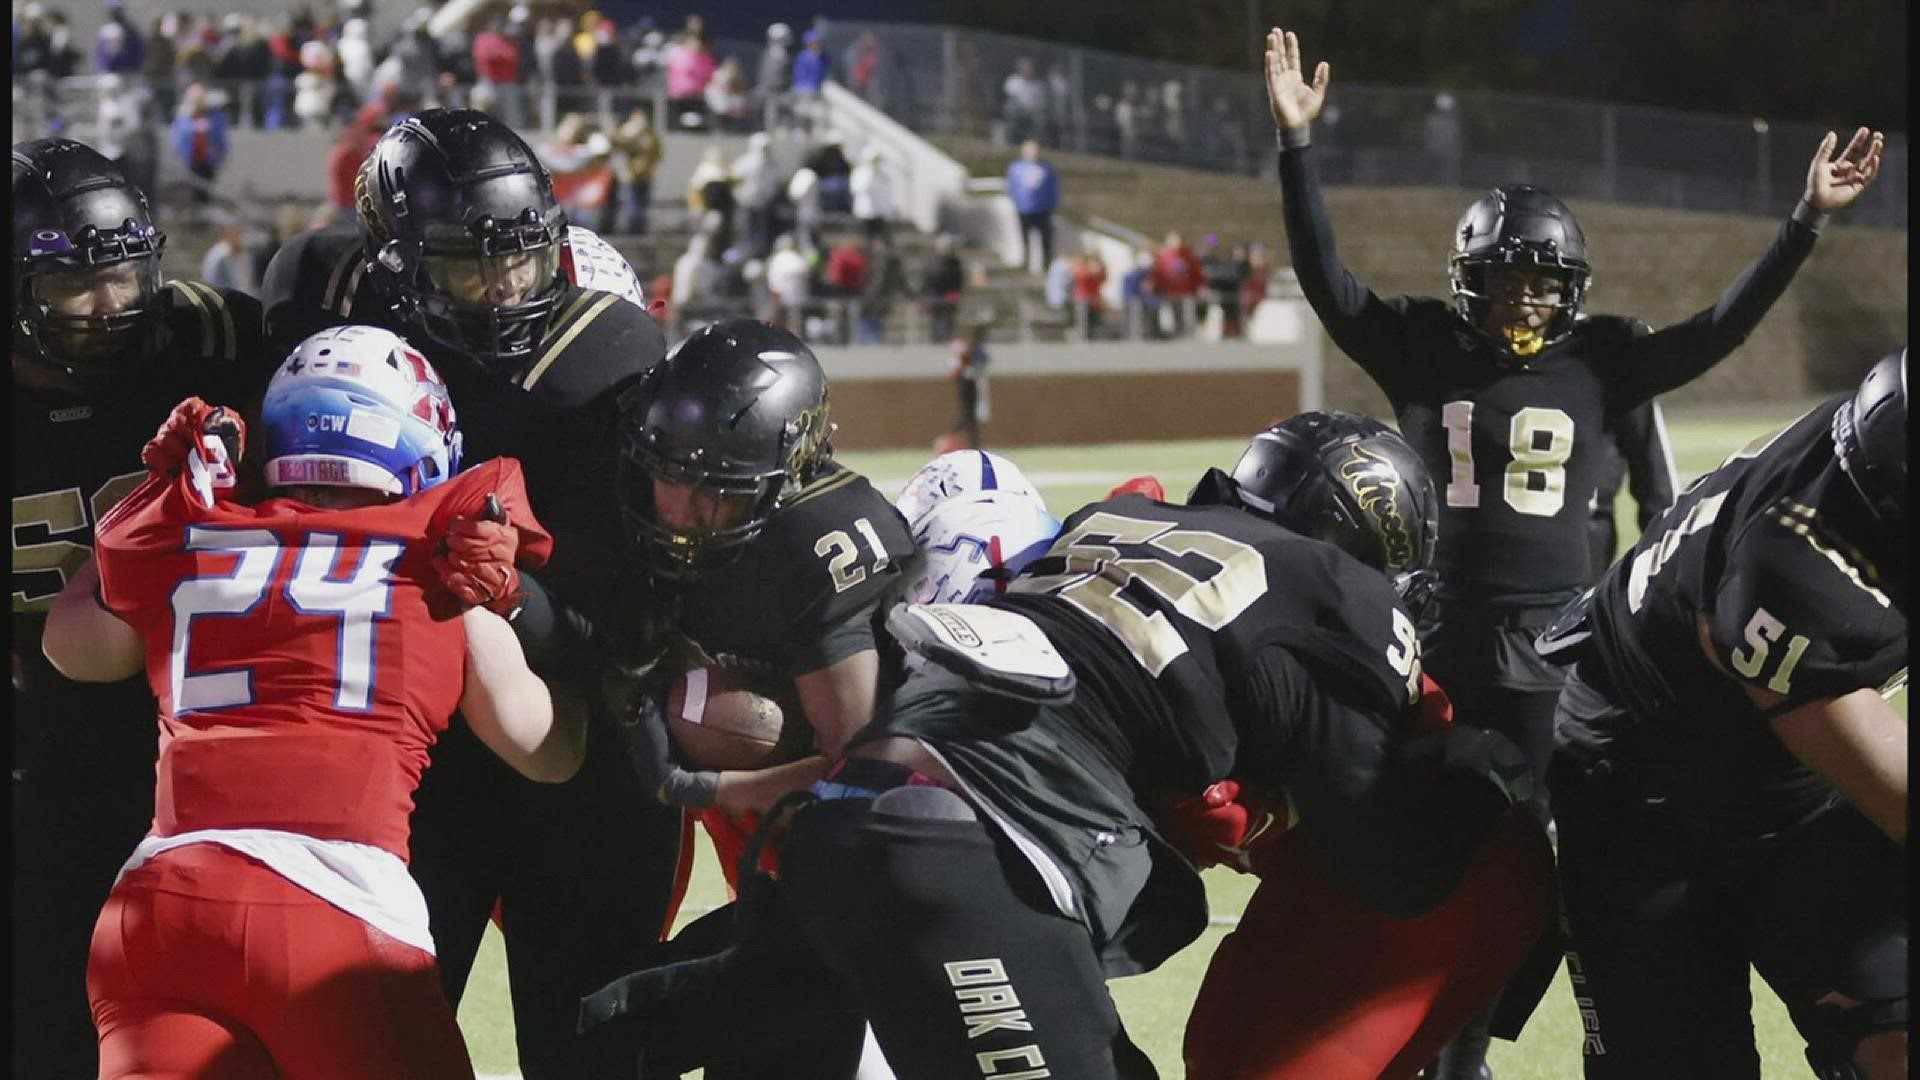 Battle in the trenches could decide 5A-DII State Championship Friday night